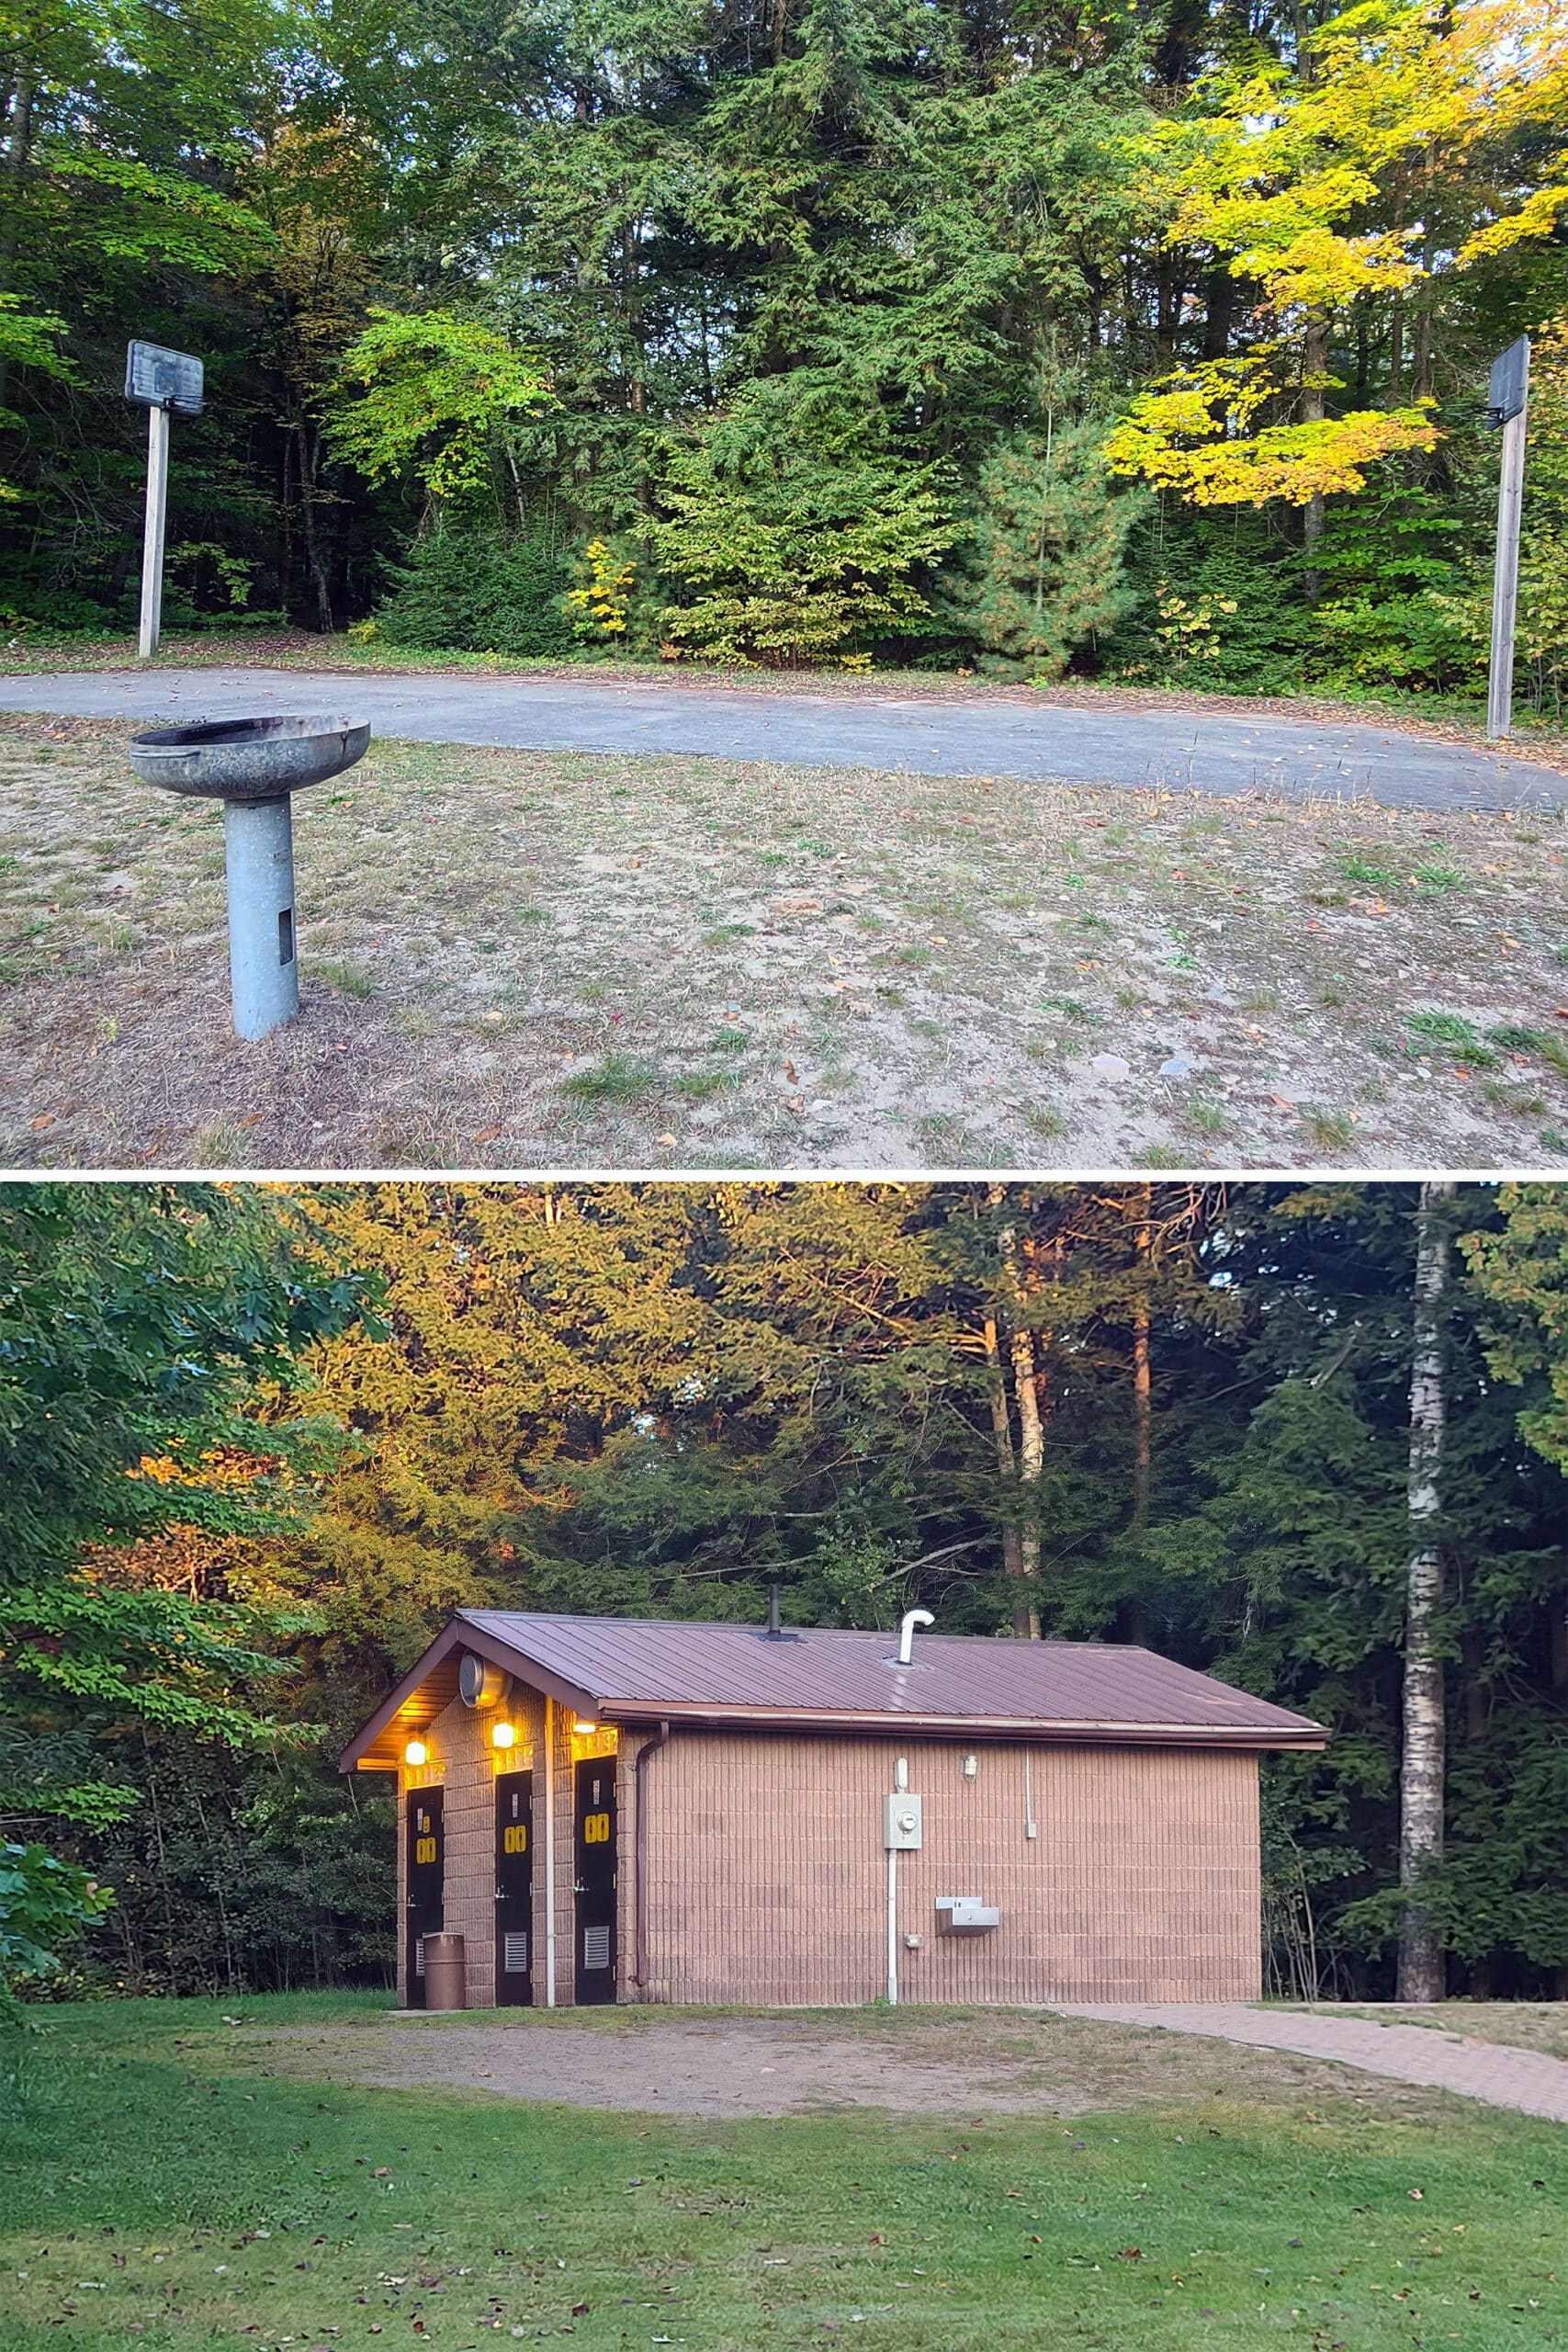 2 part image showing a rustic basketball net and a comfort station.